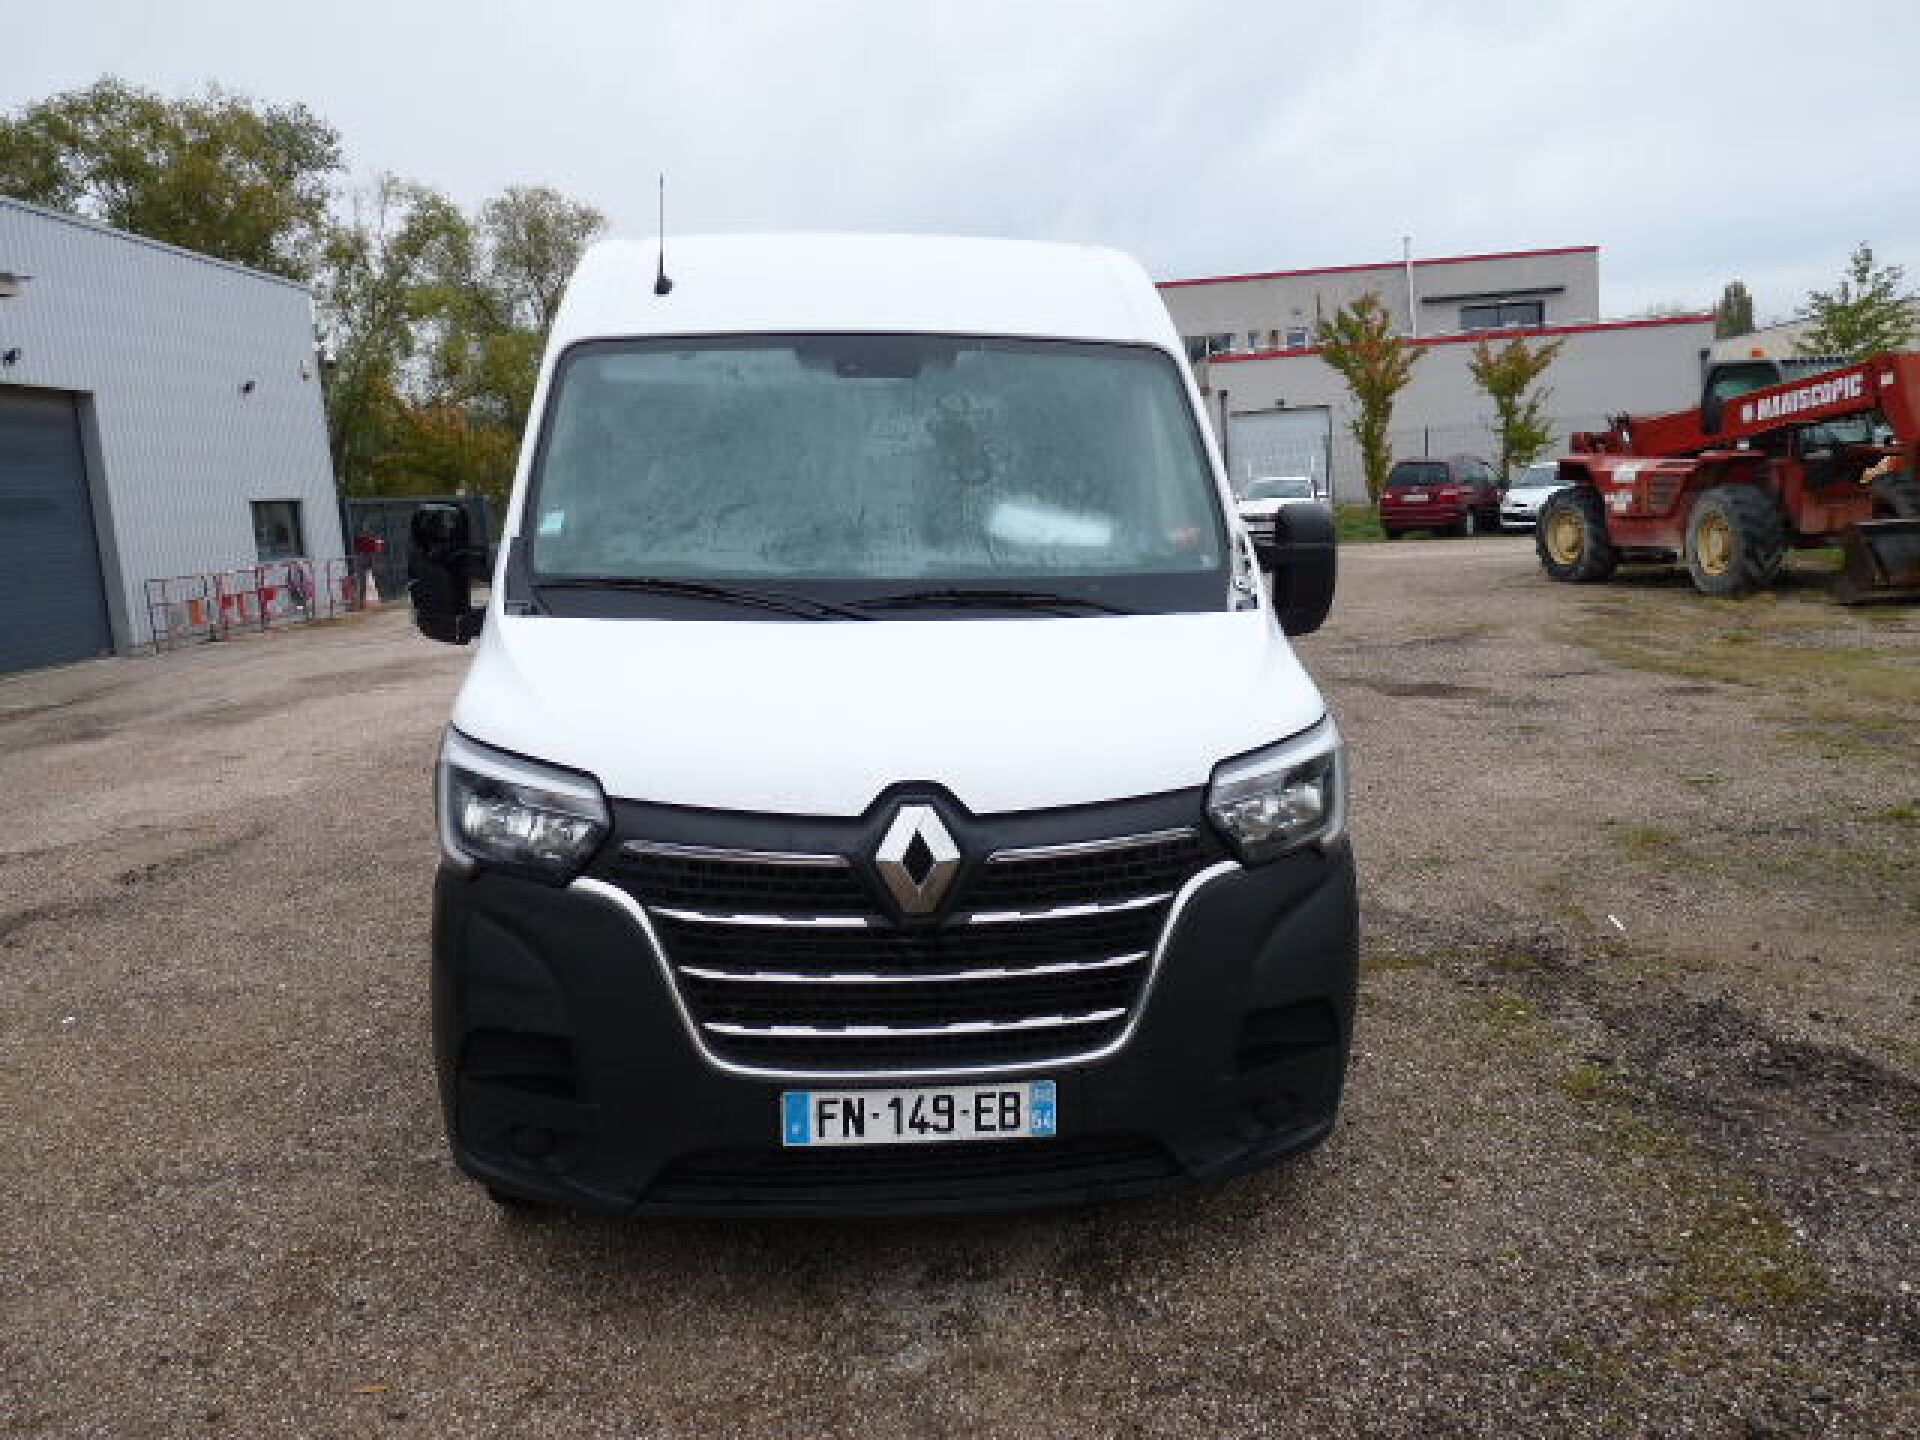 Null CTTE RENAULT MASTER 
Carrosserie : FOURGON
N° série type : VF1MA00036384601&hellip;